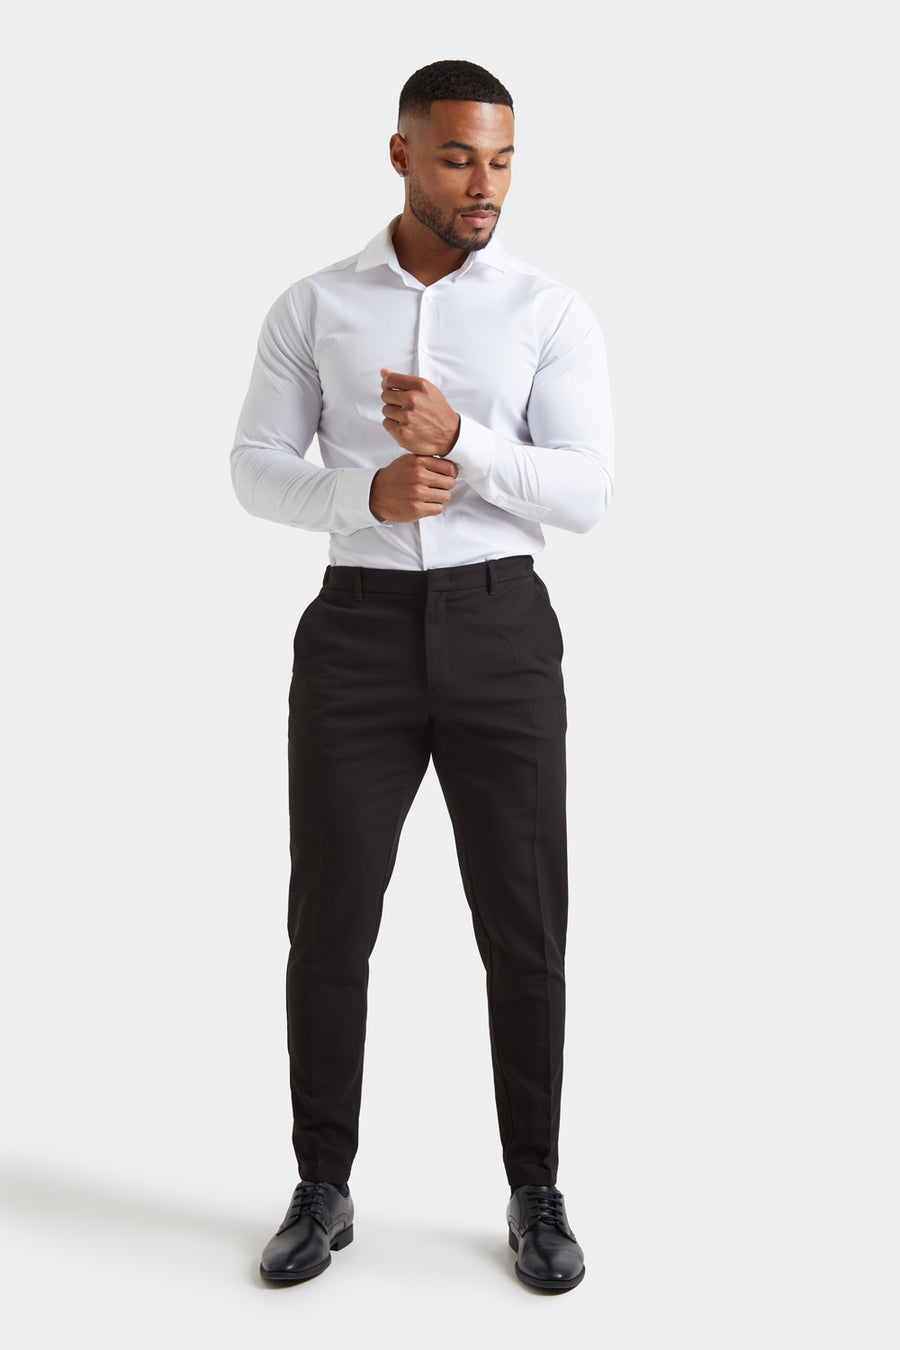 Athletic Fit Essential Pants in Black - TAILORED ATHLETE - USA